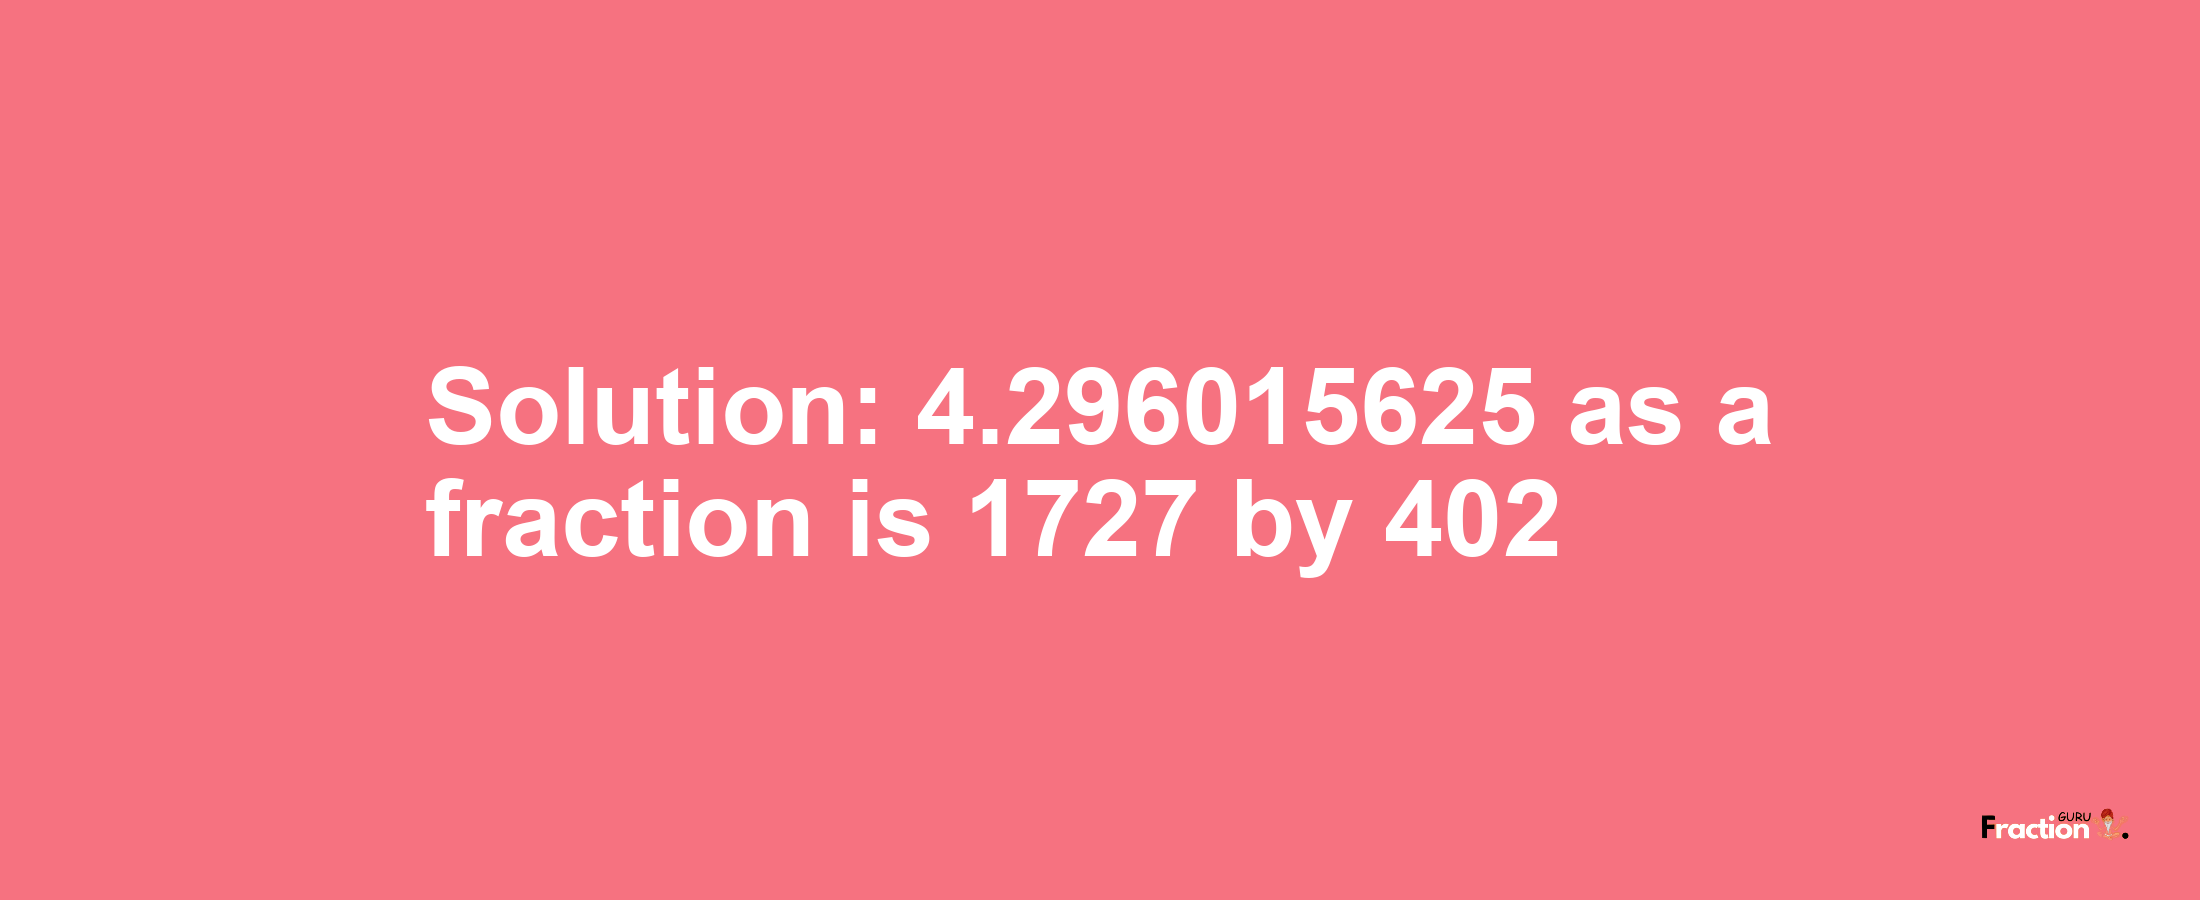 Solution:4.296015625 as a fraction is 1727/402